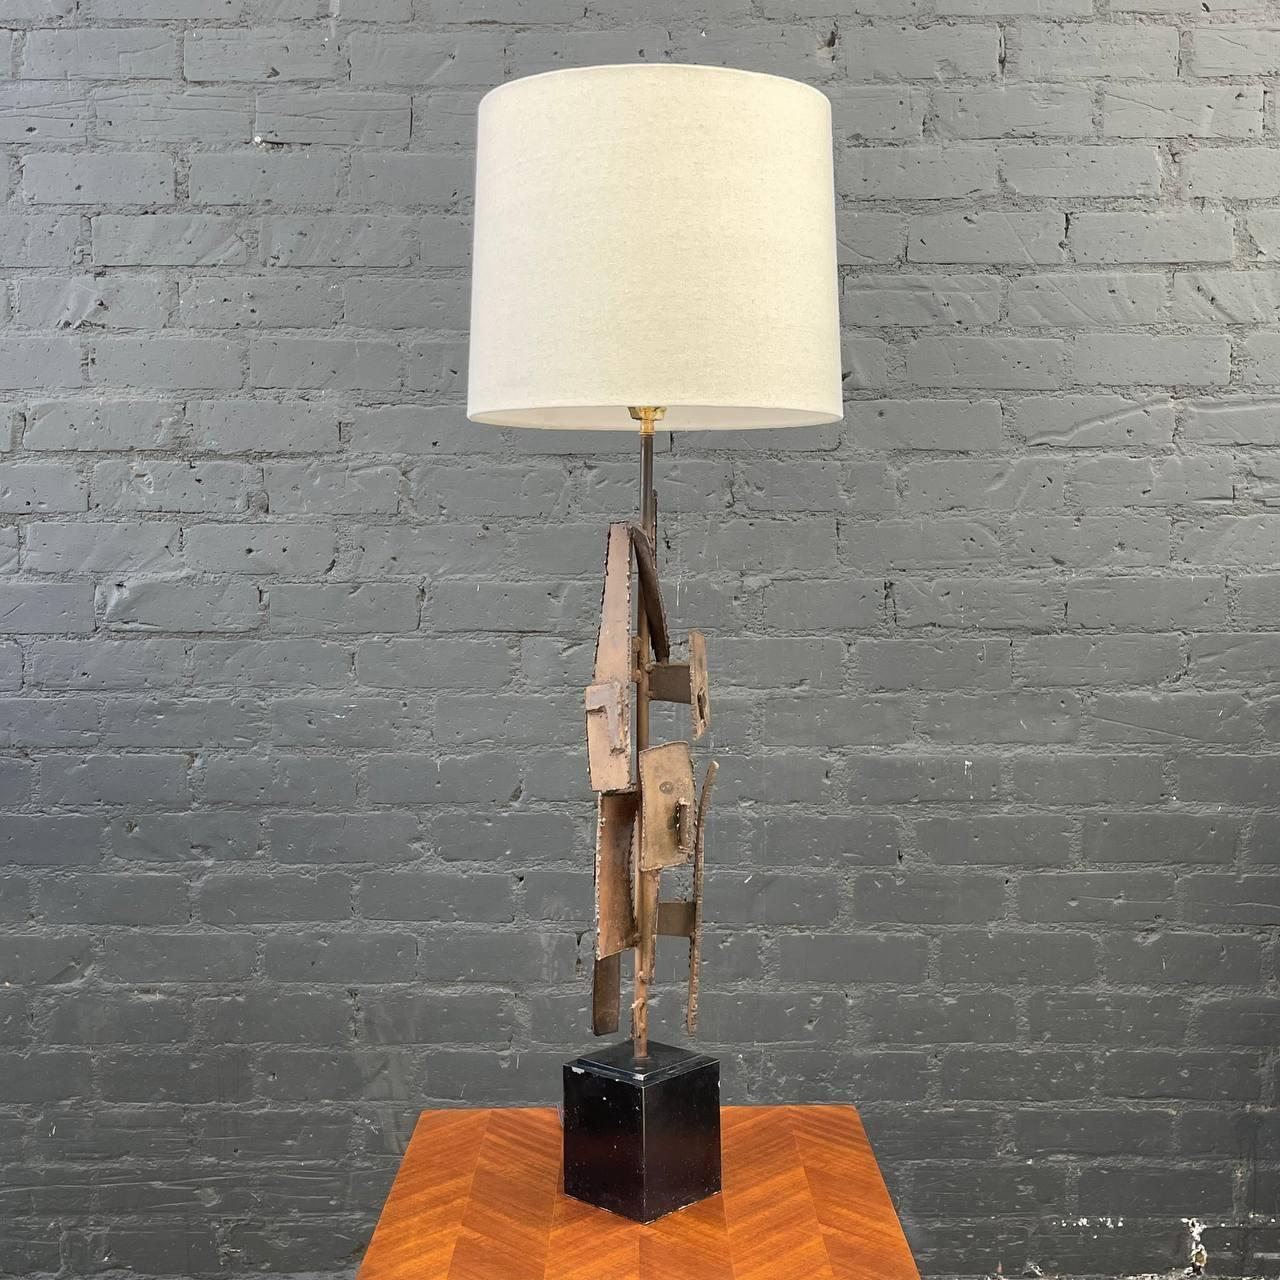 Richard Barr Brutalist Iron Table Lamp for Laurel

Newly Rewired, New Custom Linen Shade
Materials: Iron, New Linen Shade 
Dimensions: 
47”H x 5”W x 5”D
Shade:
13”H x 15”-16”W